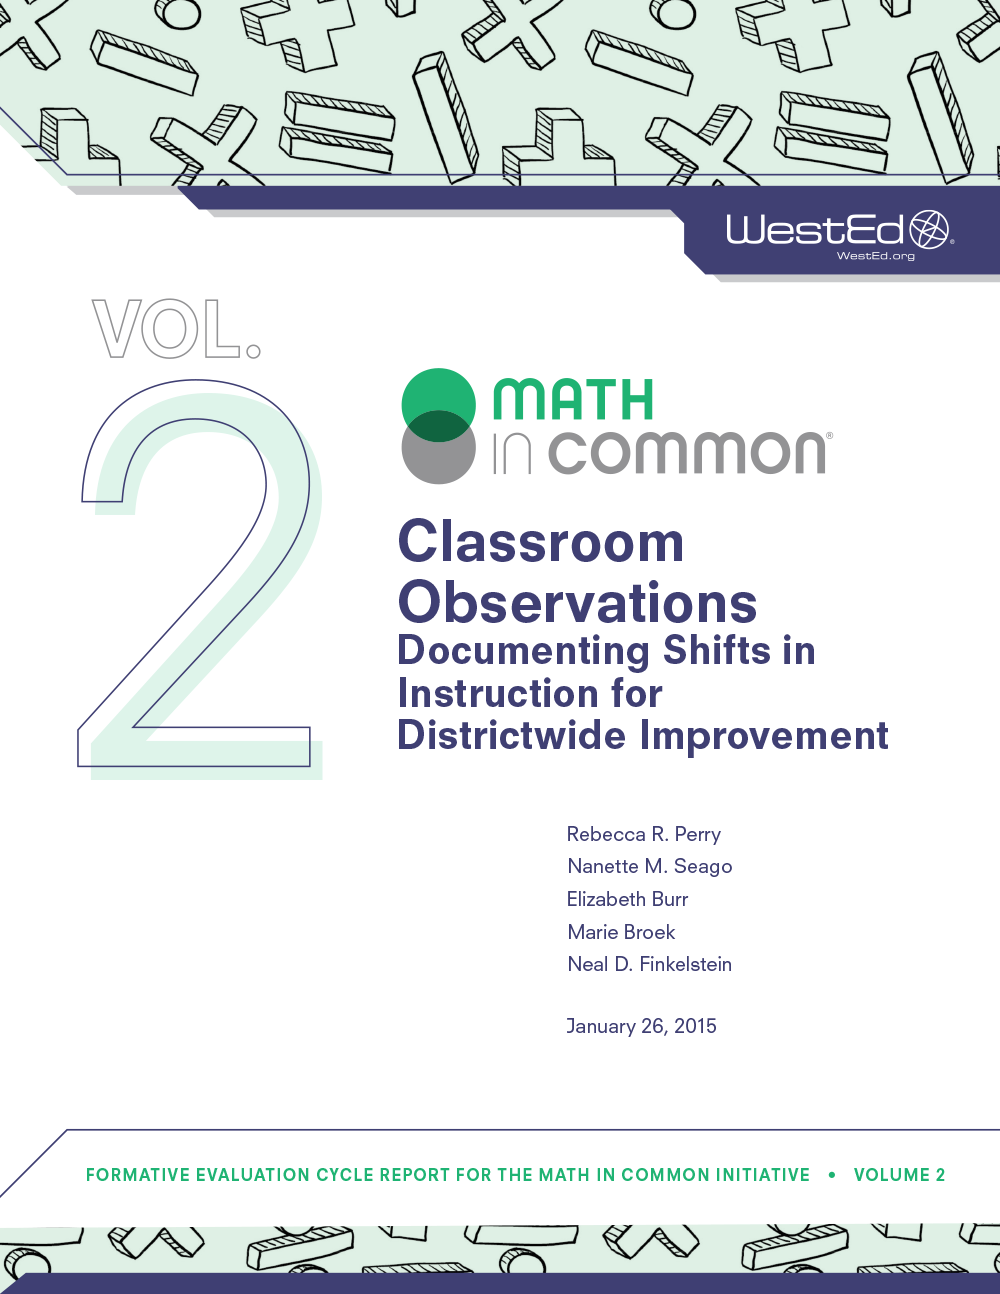 Cover image of Classroom Observations Documenting Shifts in Instruction for Districtwide Improvement